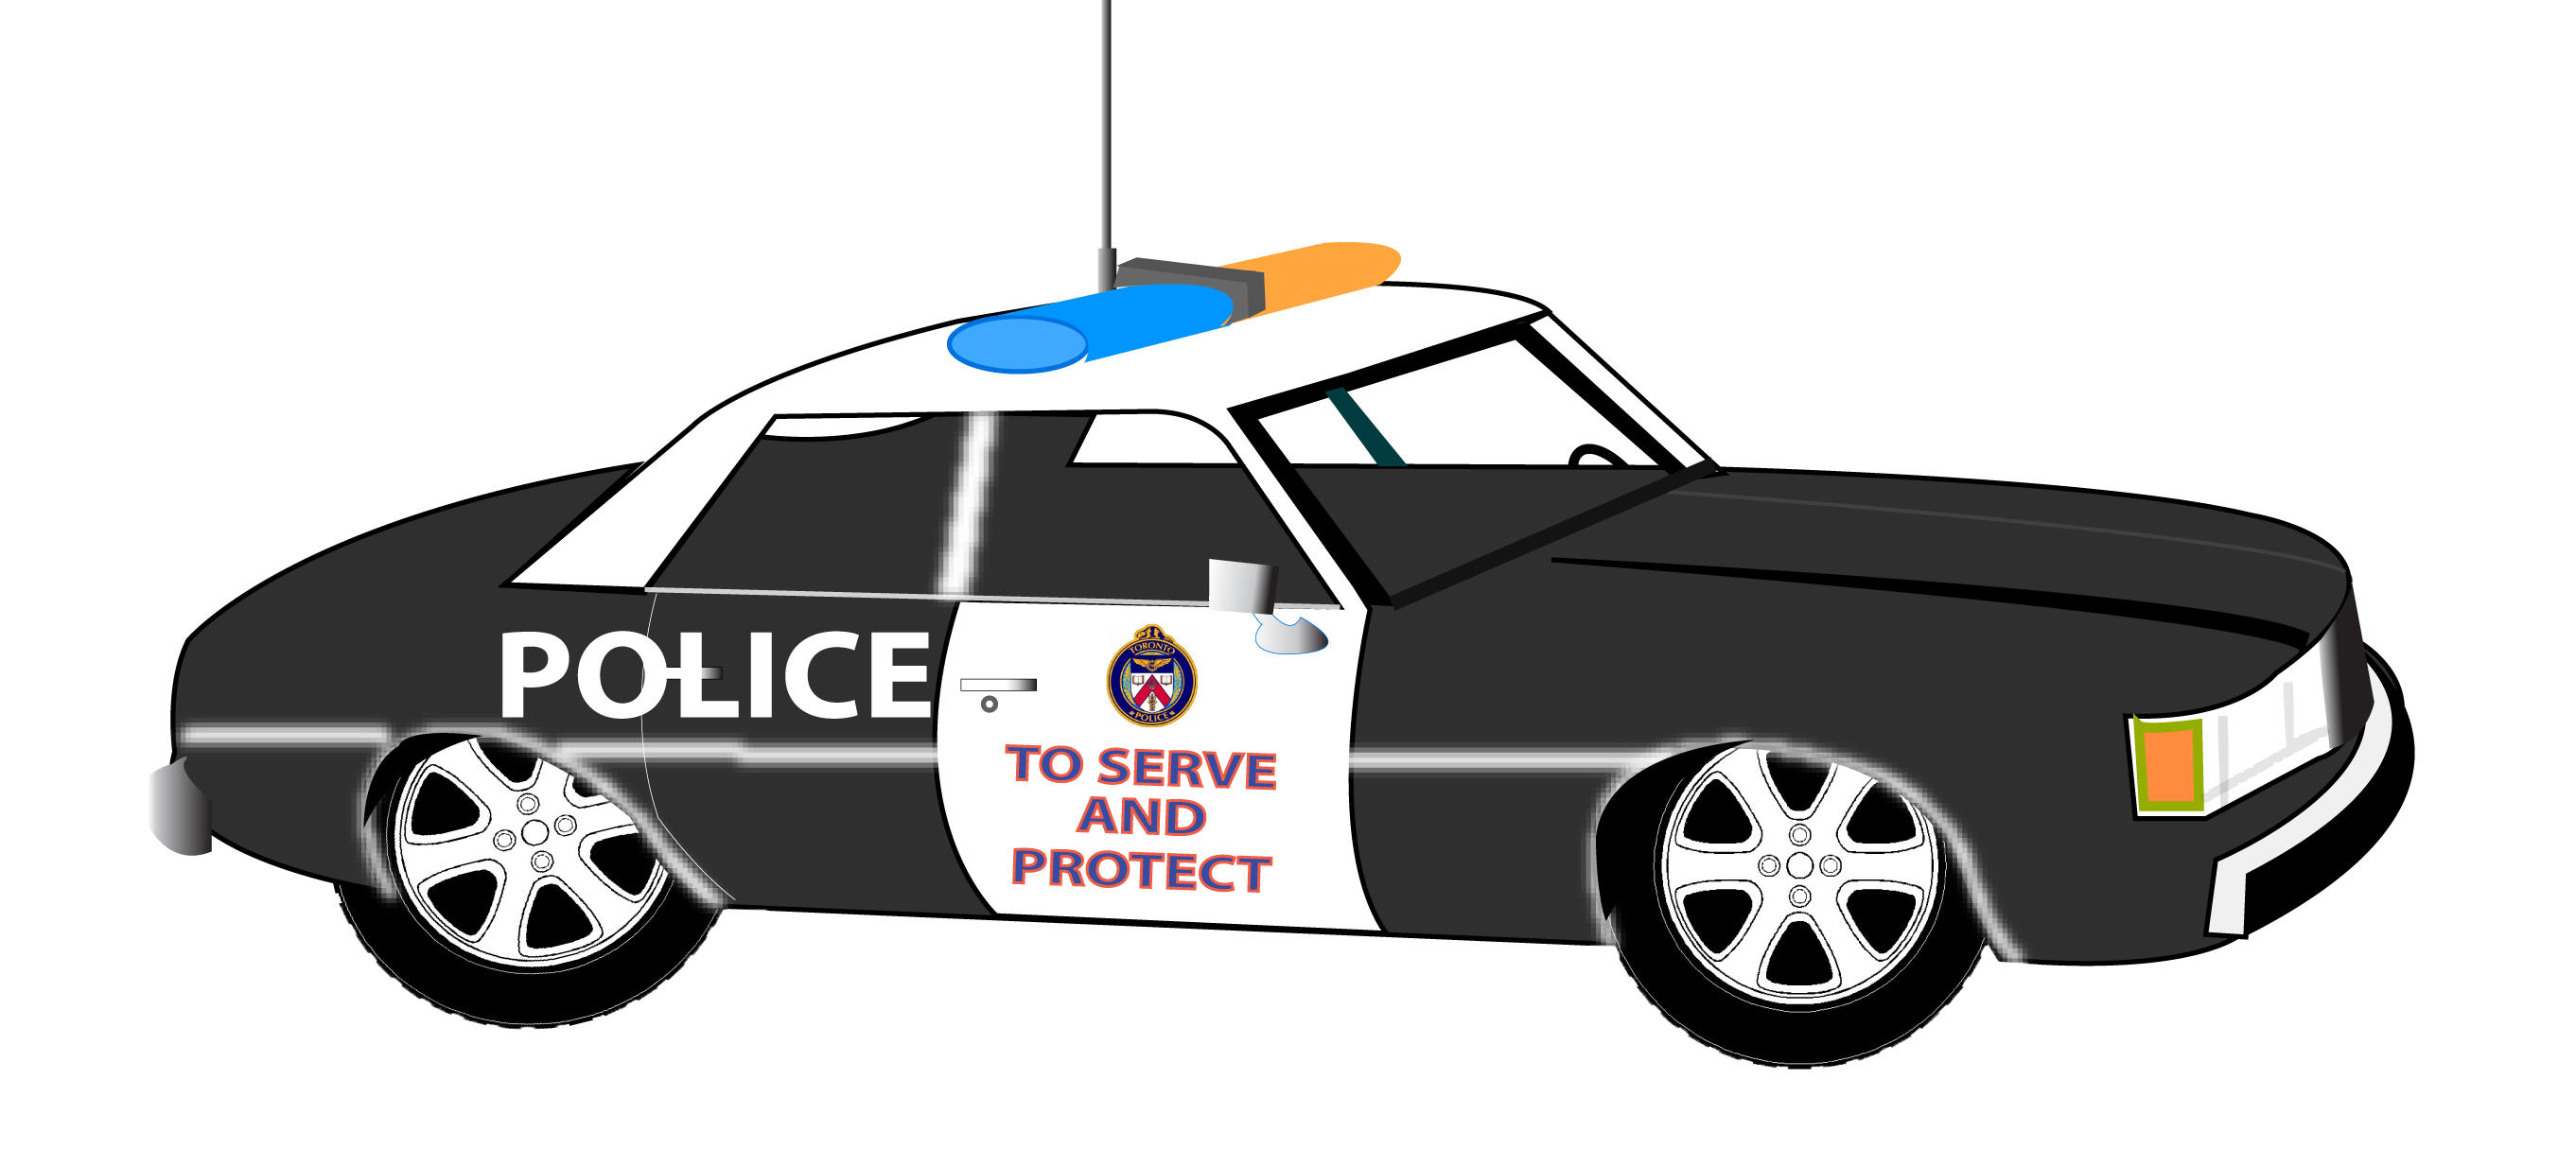 police car clipart black and white - photo #19